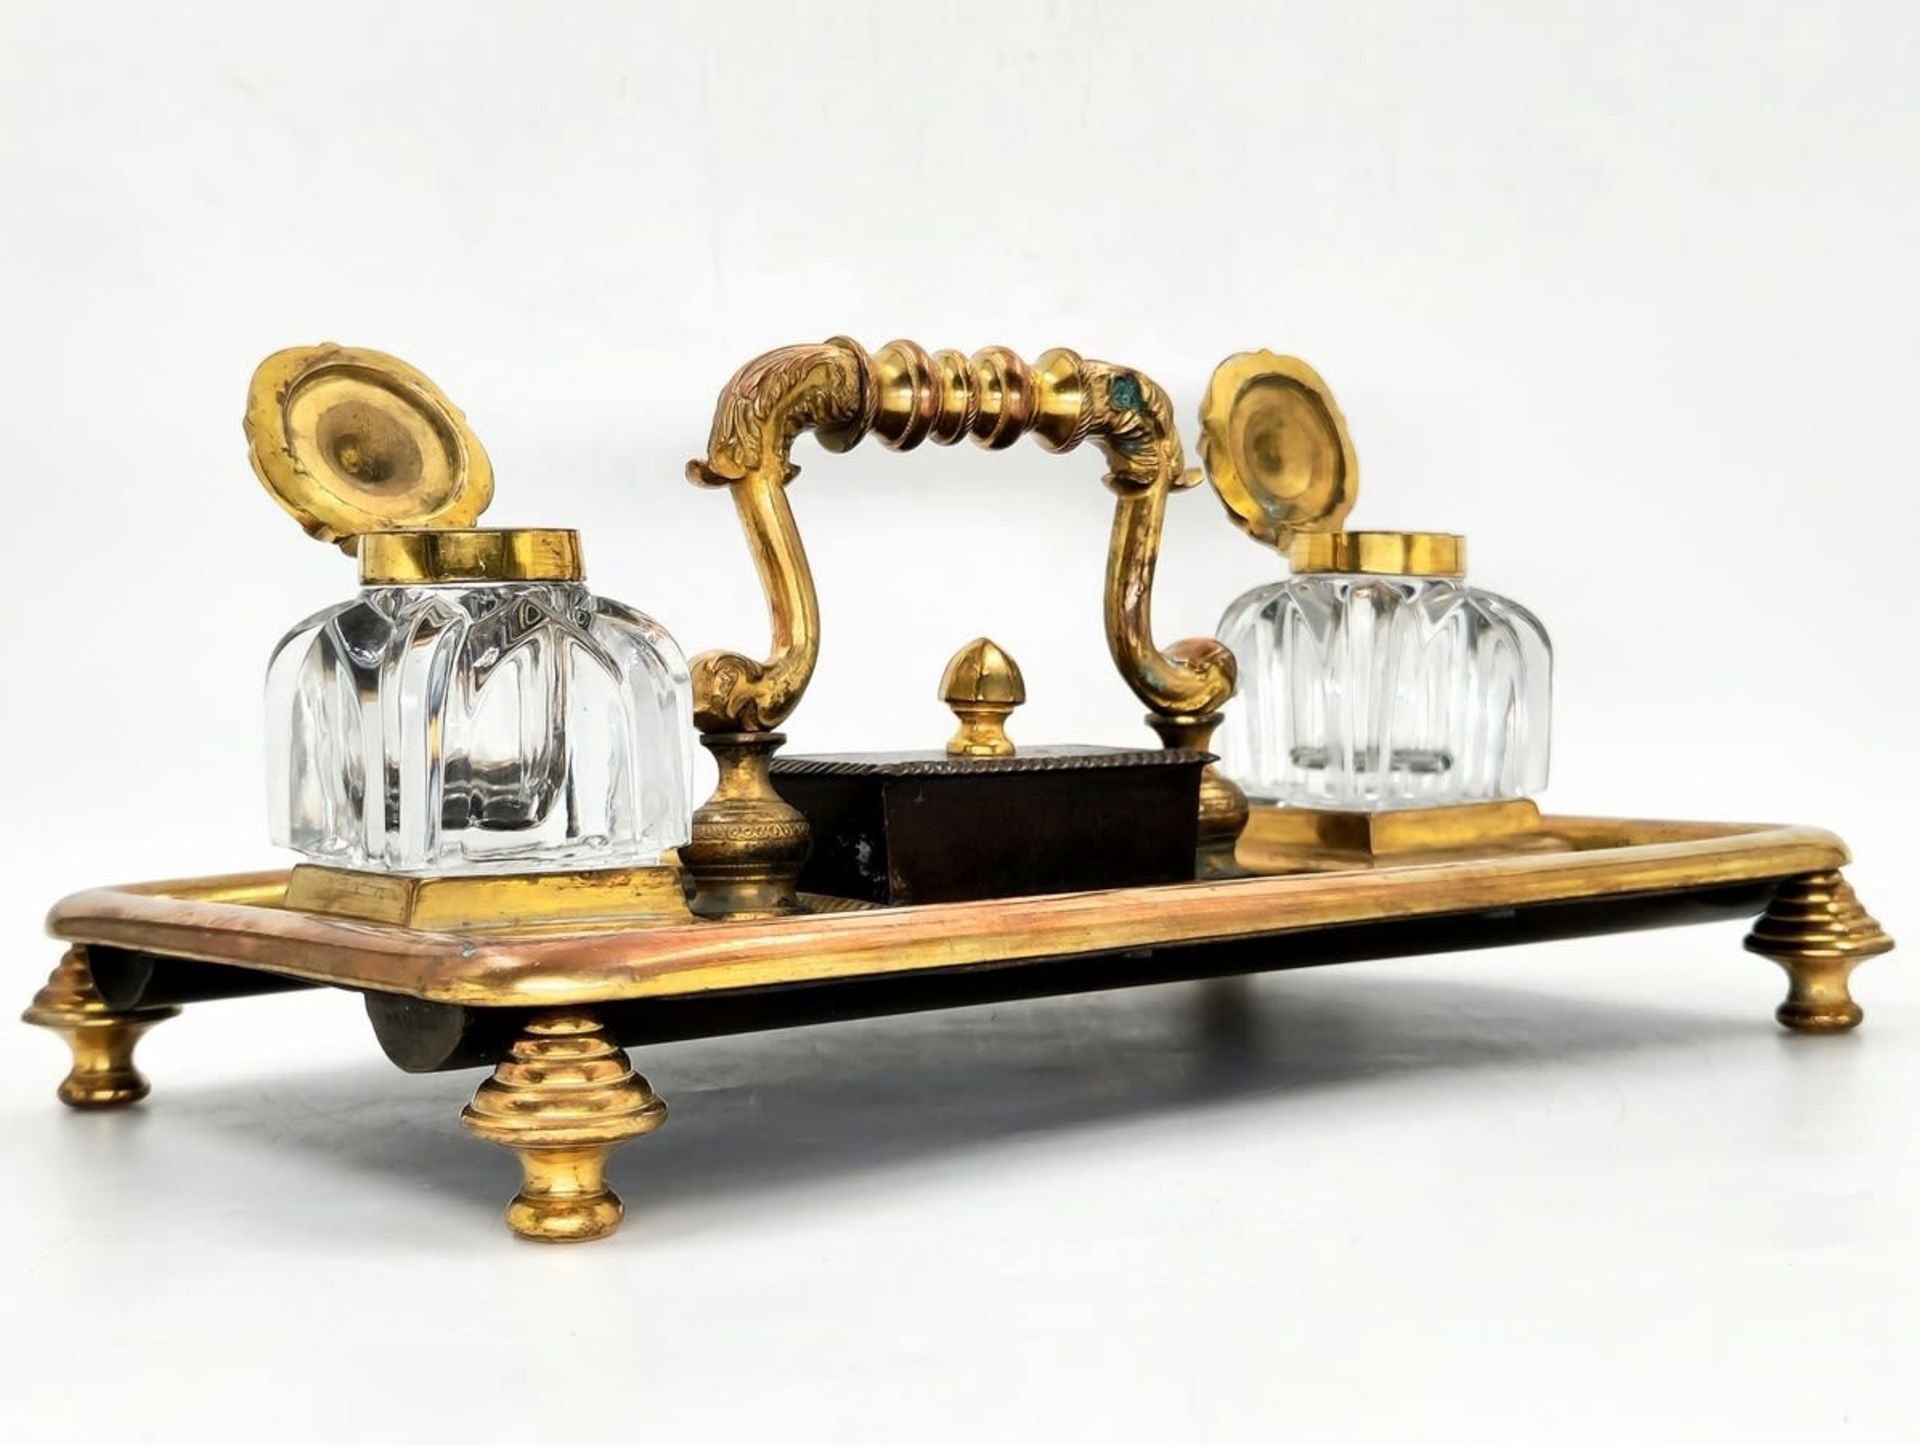 An antique double tabletop inkwell, brass and spelter, the ink wells themselves are made of glass, - Bild 6 aus 7